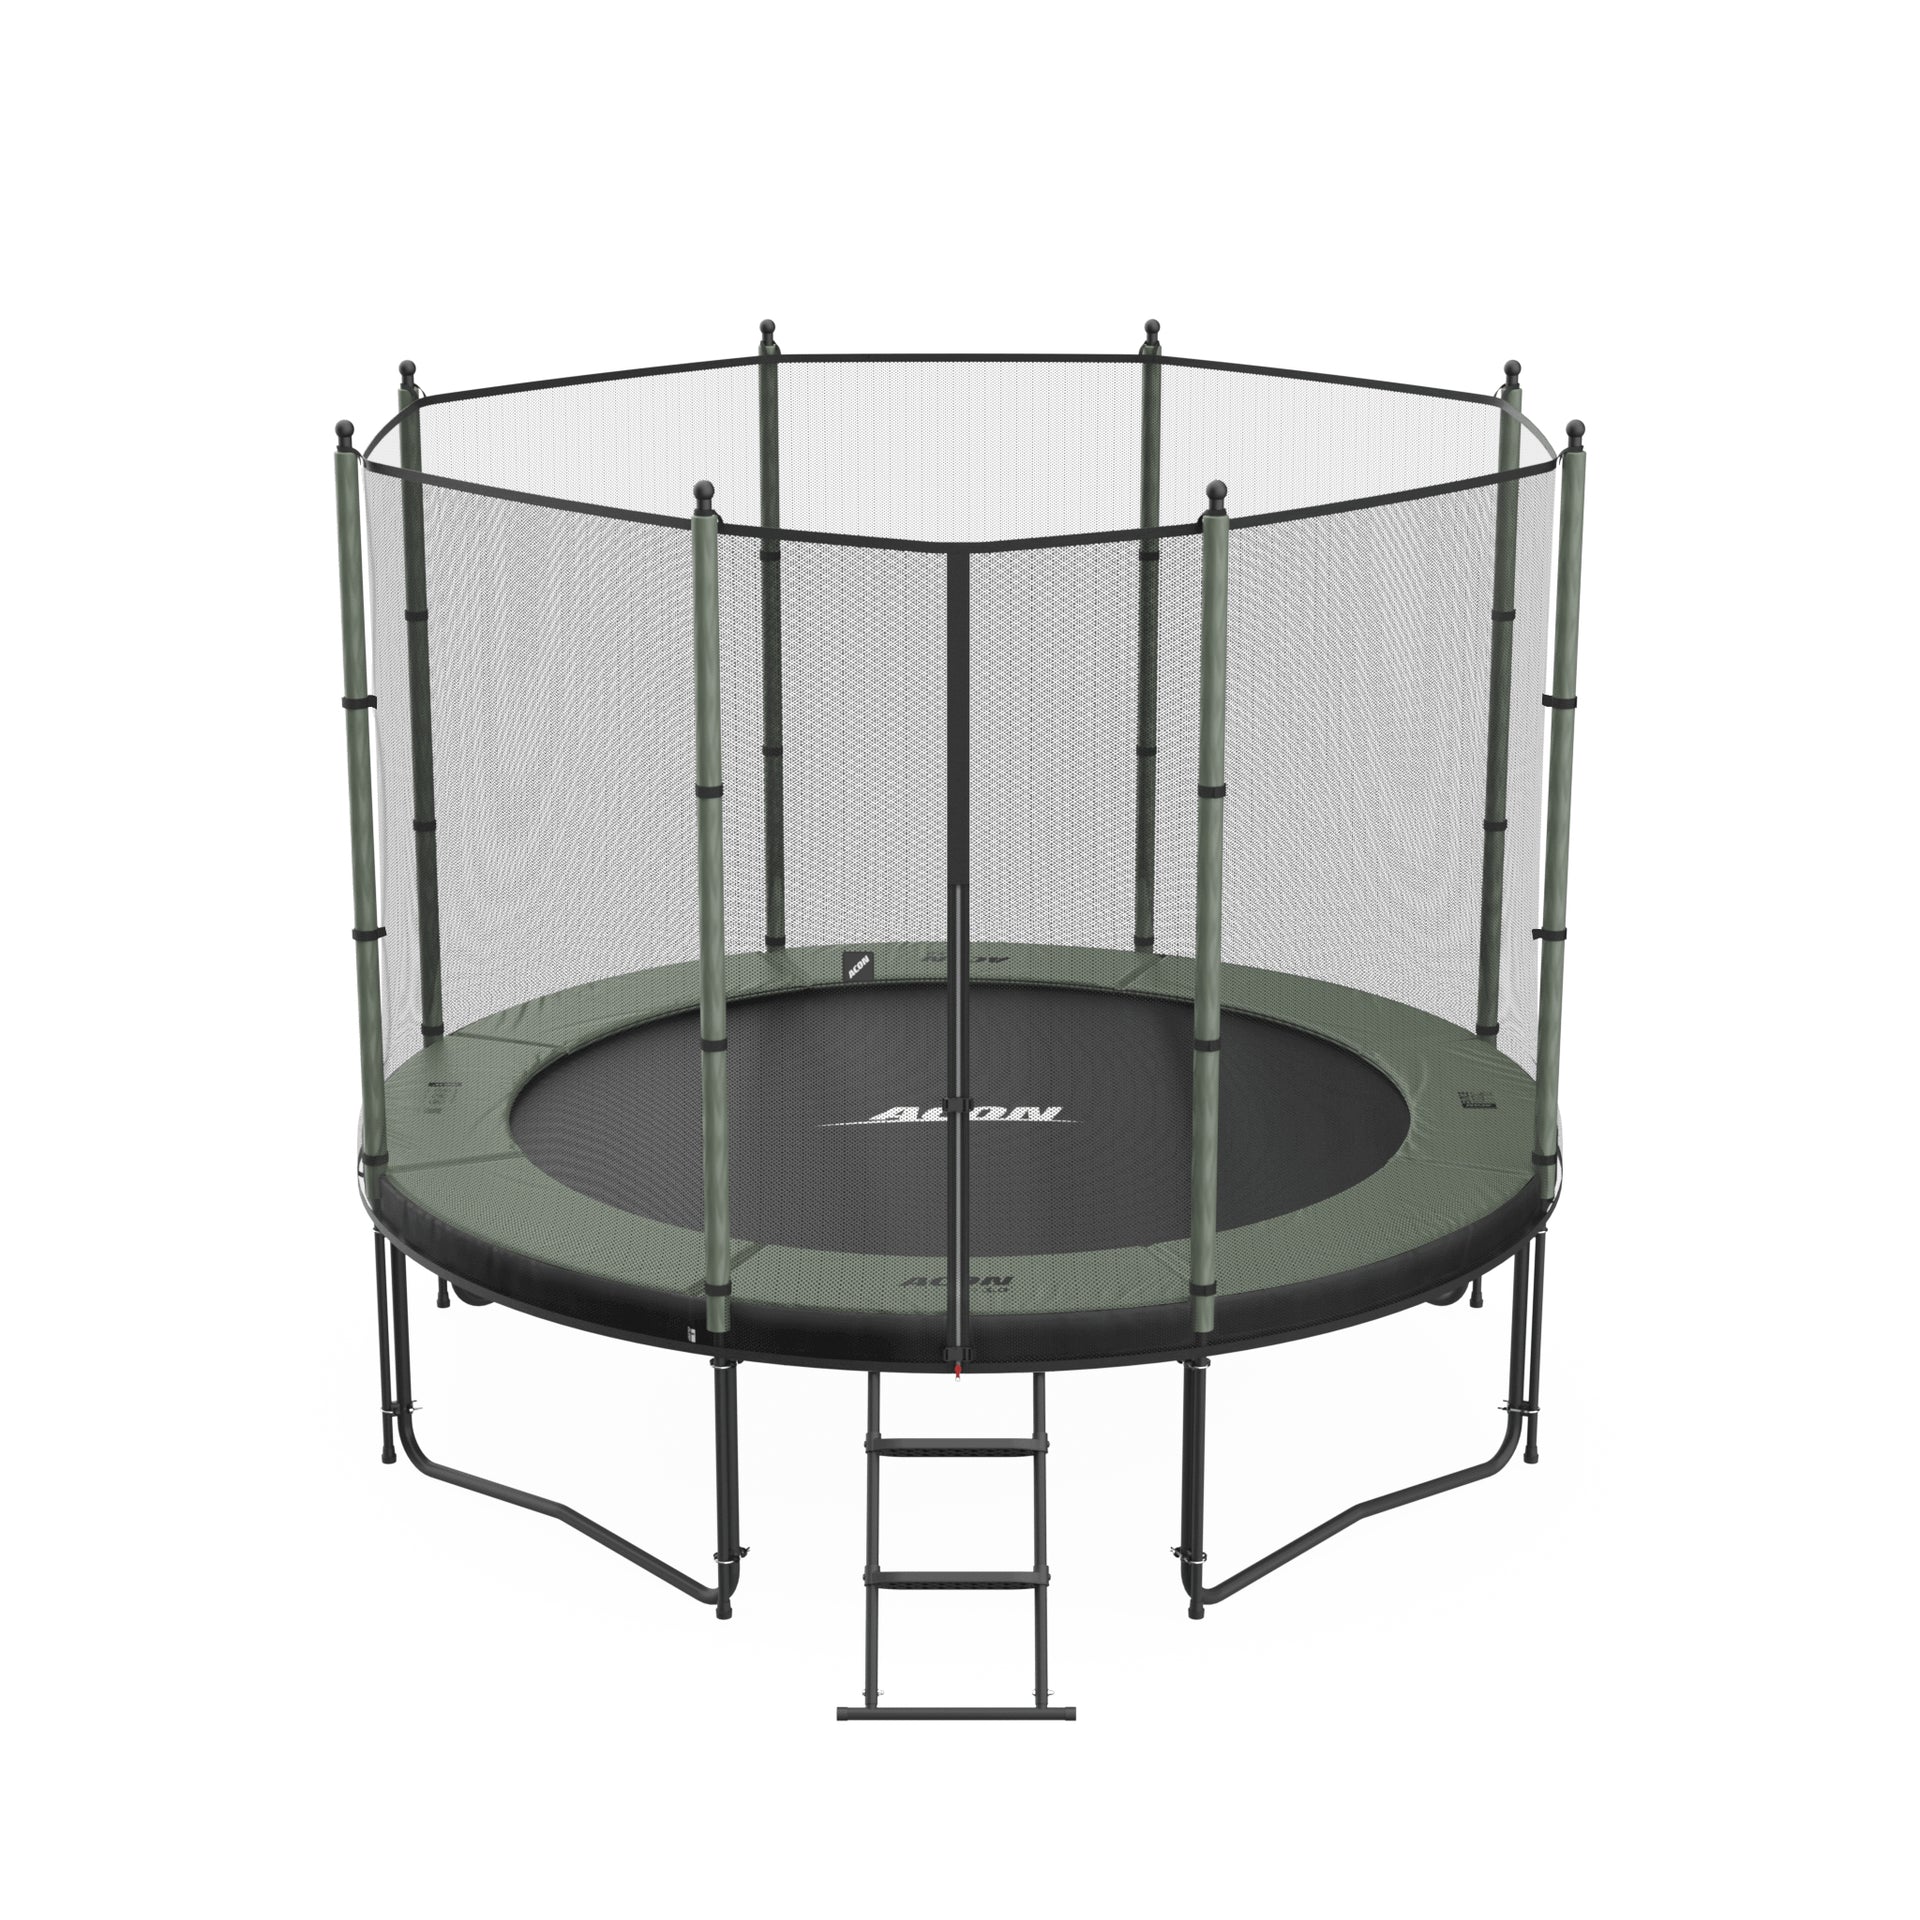 The ACON Air 10 ft Round Trampoline on a white background.